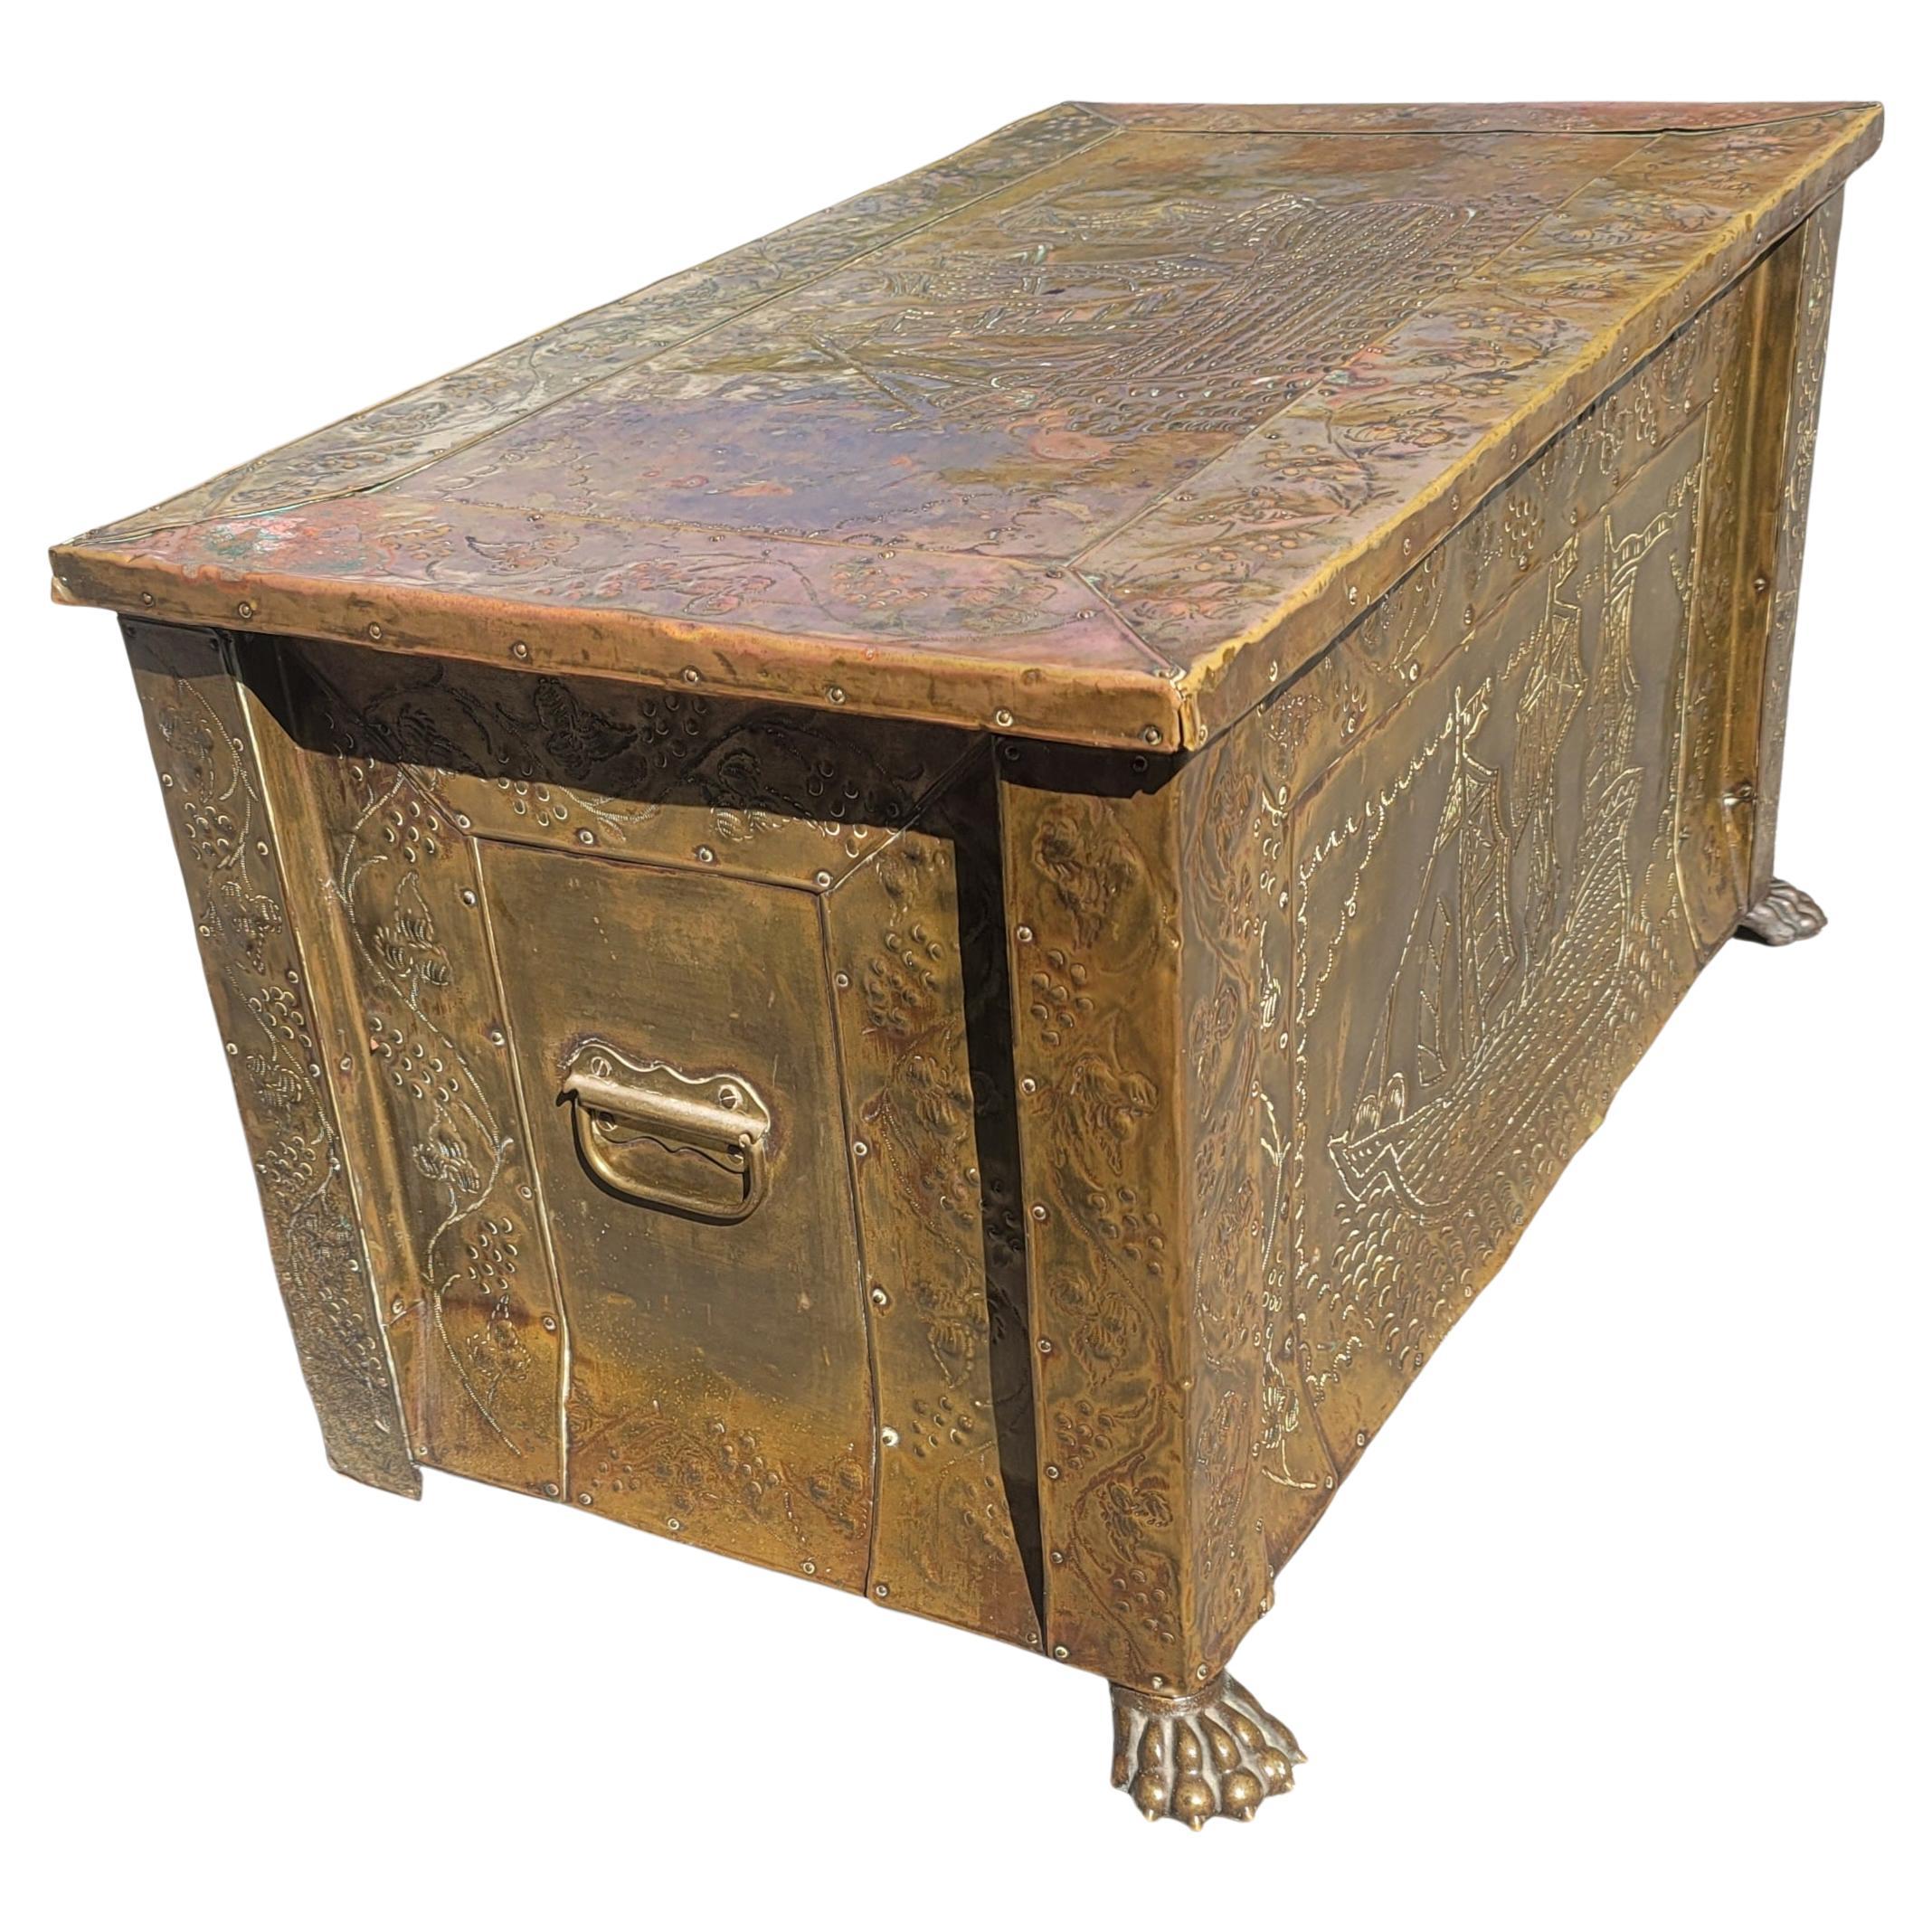 Metalwork Victorian Brass and Copper Ornate Coal and Fire Logs Chest w. Paw Feet, C. 1890s